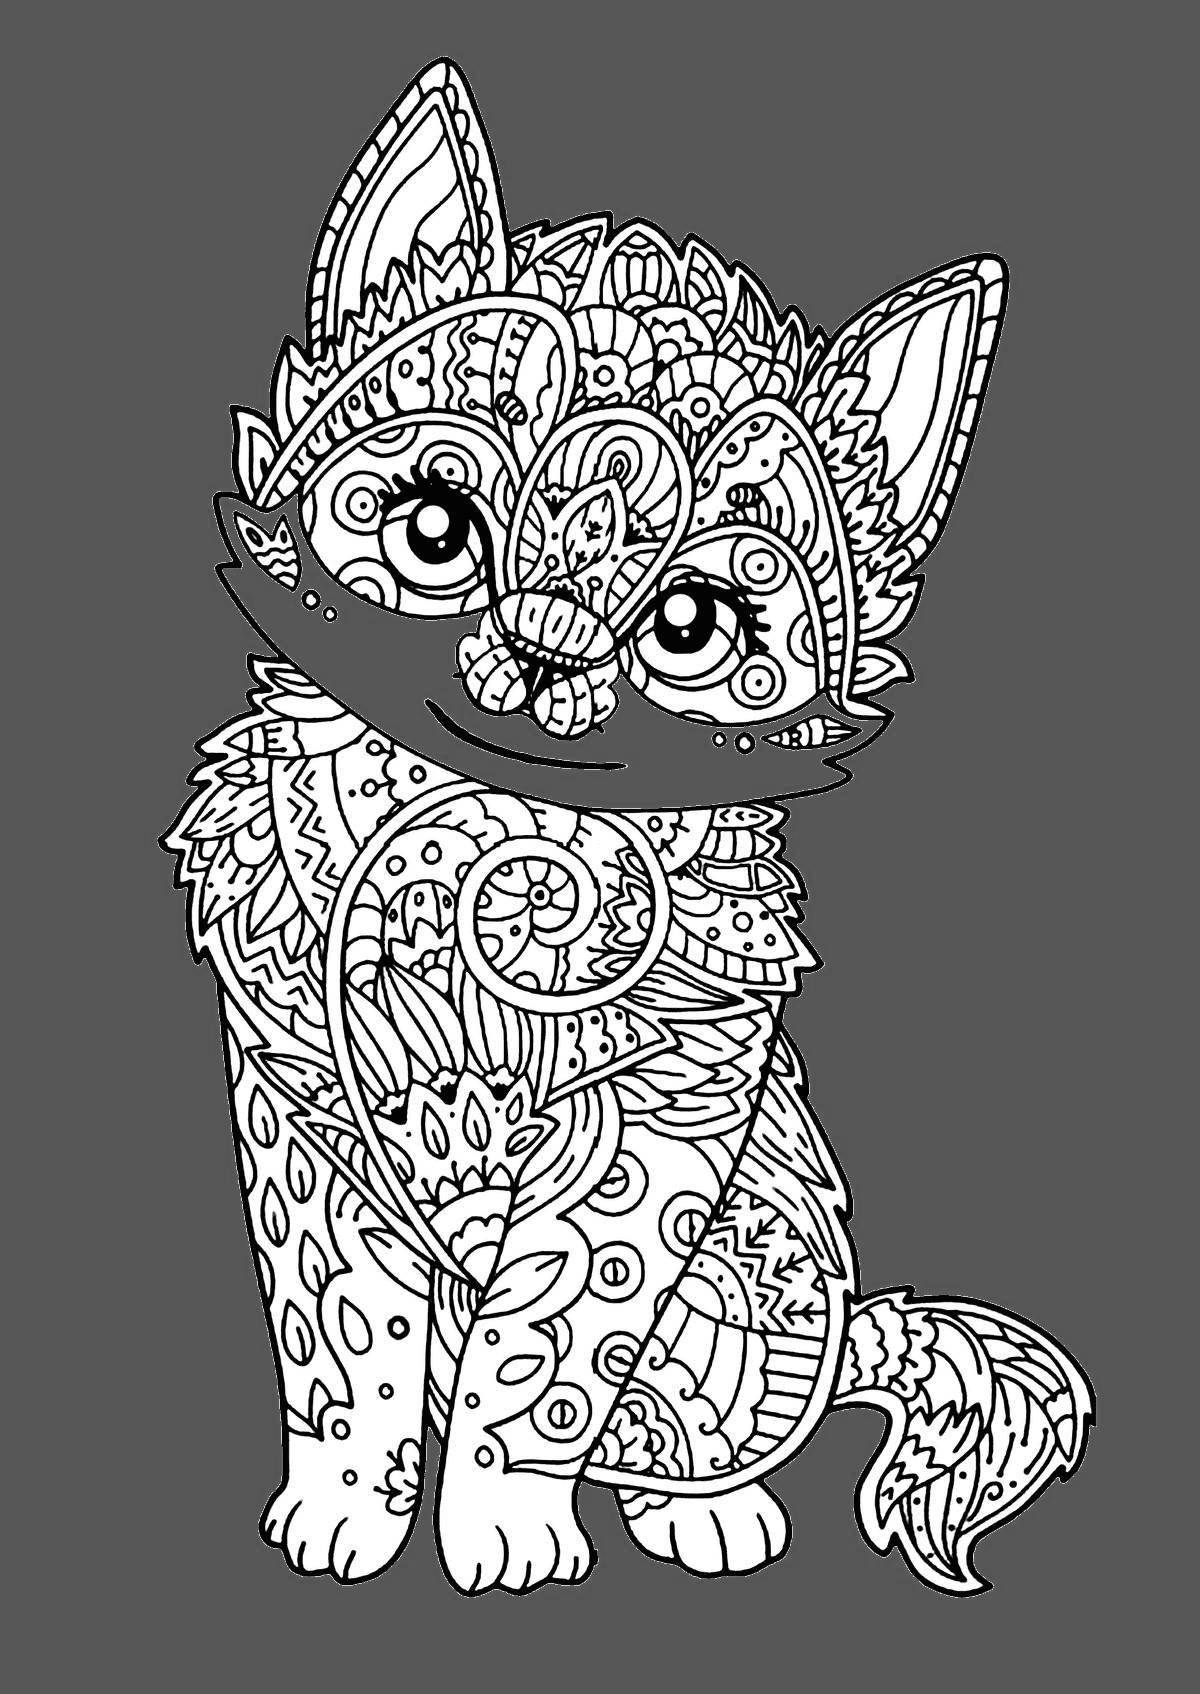 Delightful antistress coloring book for girls animals